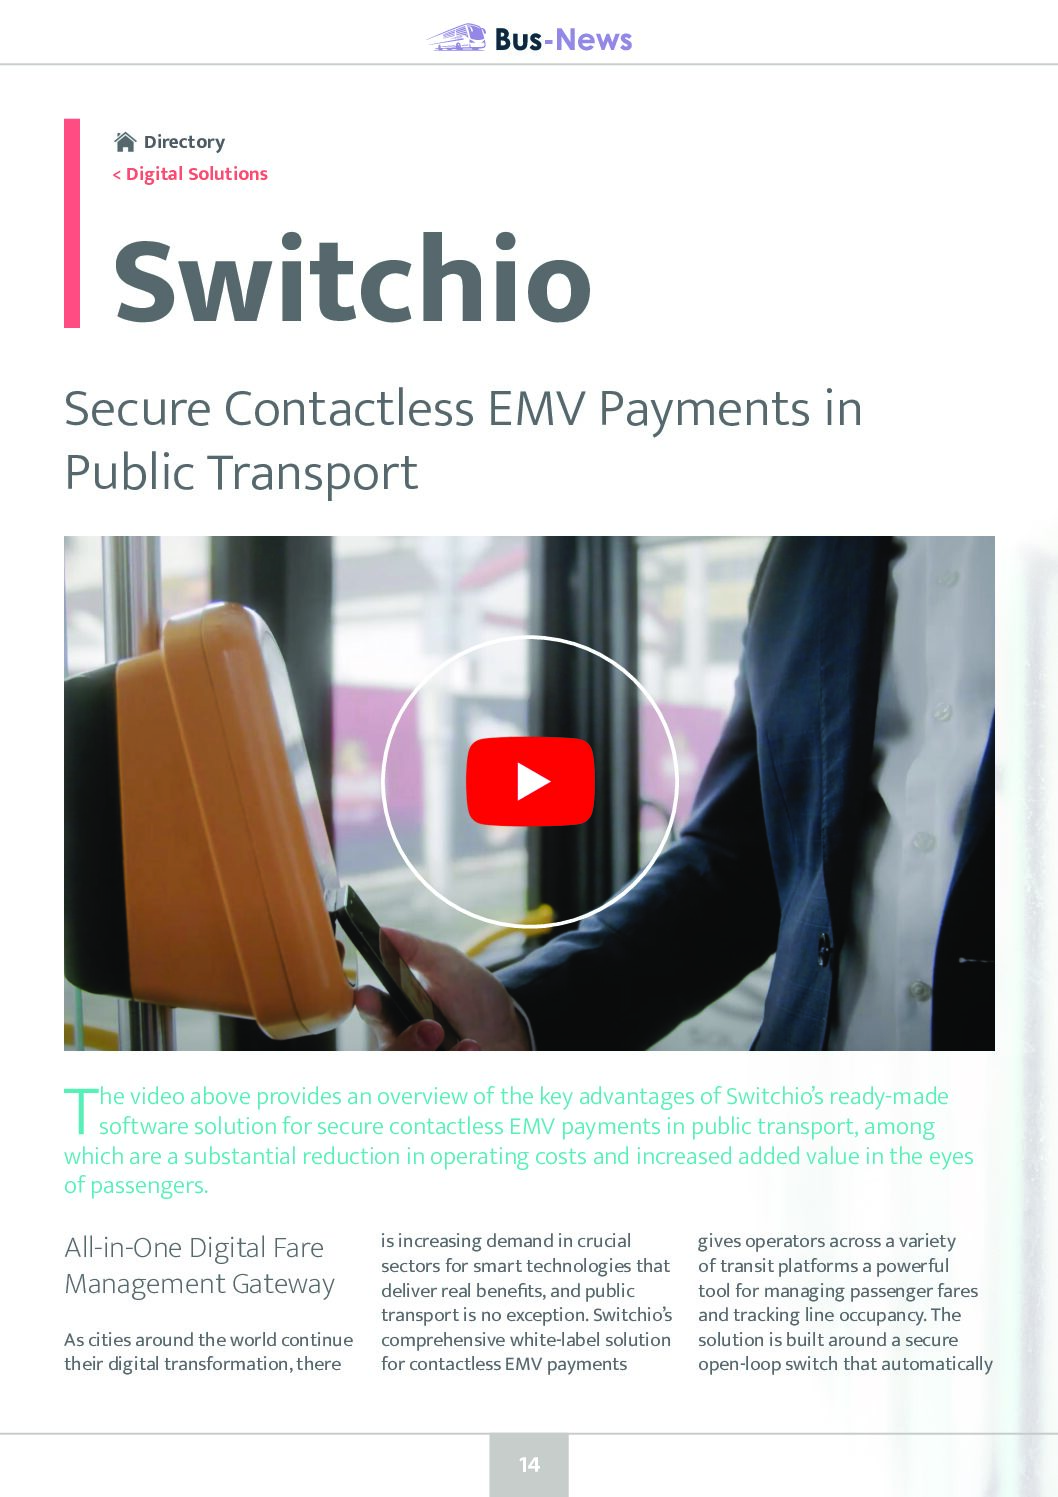 Secure Contactless EMV Payments in Public Transport